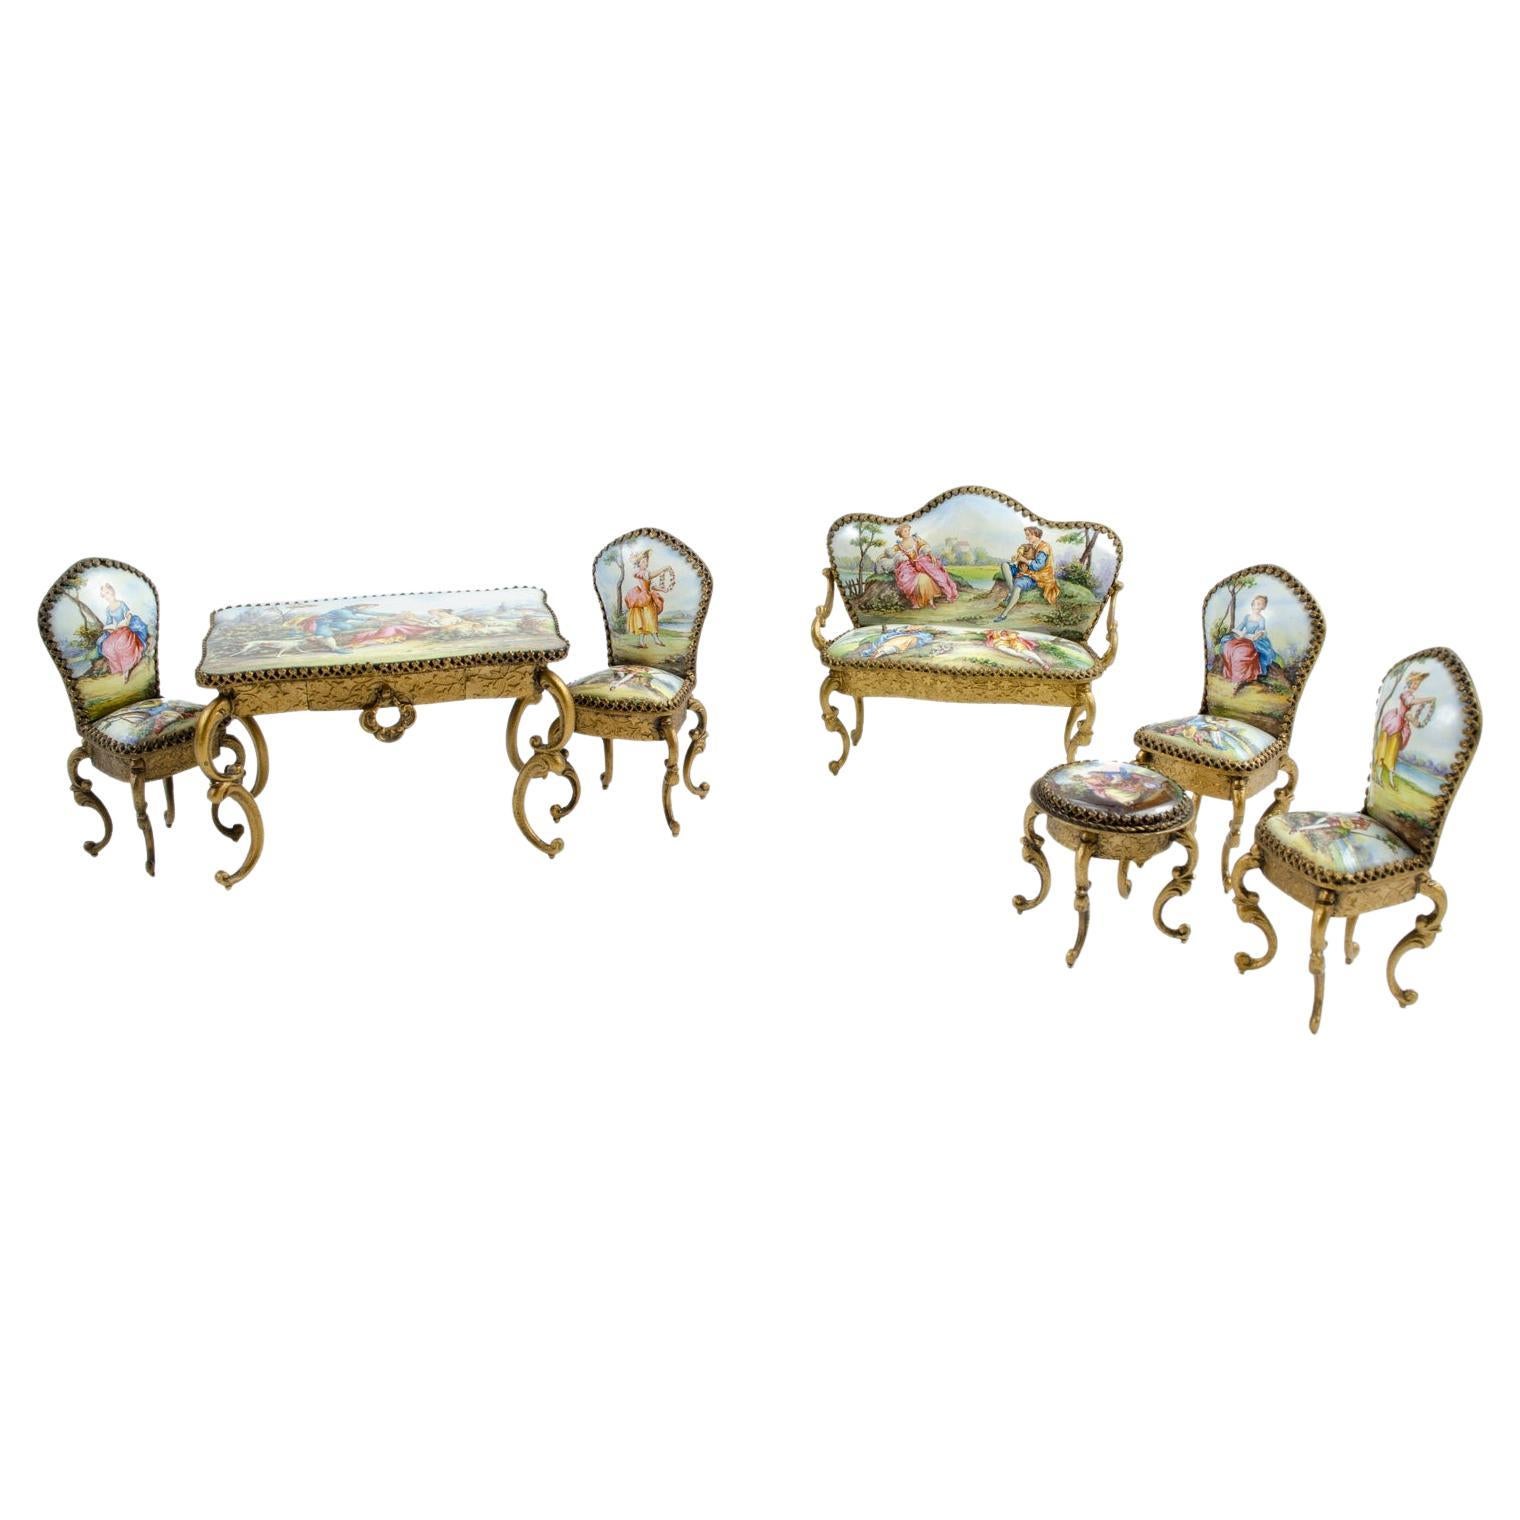 Bronze Vienes miniature living room set
Miniature with enamel
Origin France Circa 1930
Materials Bronze and enamel in perfect condition
Rococo style
7 pieces
The clock does not work
Measurements of the pieces
Large table: 5 cm high, 8 cm wide, 6 cm